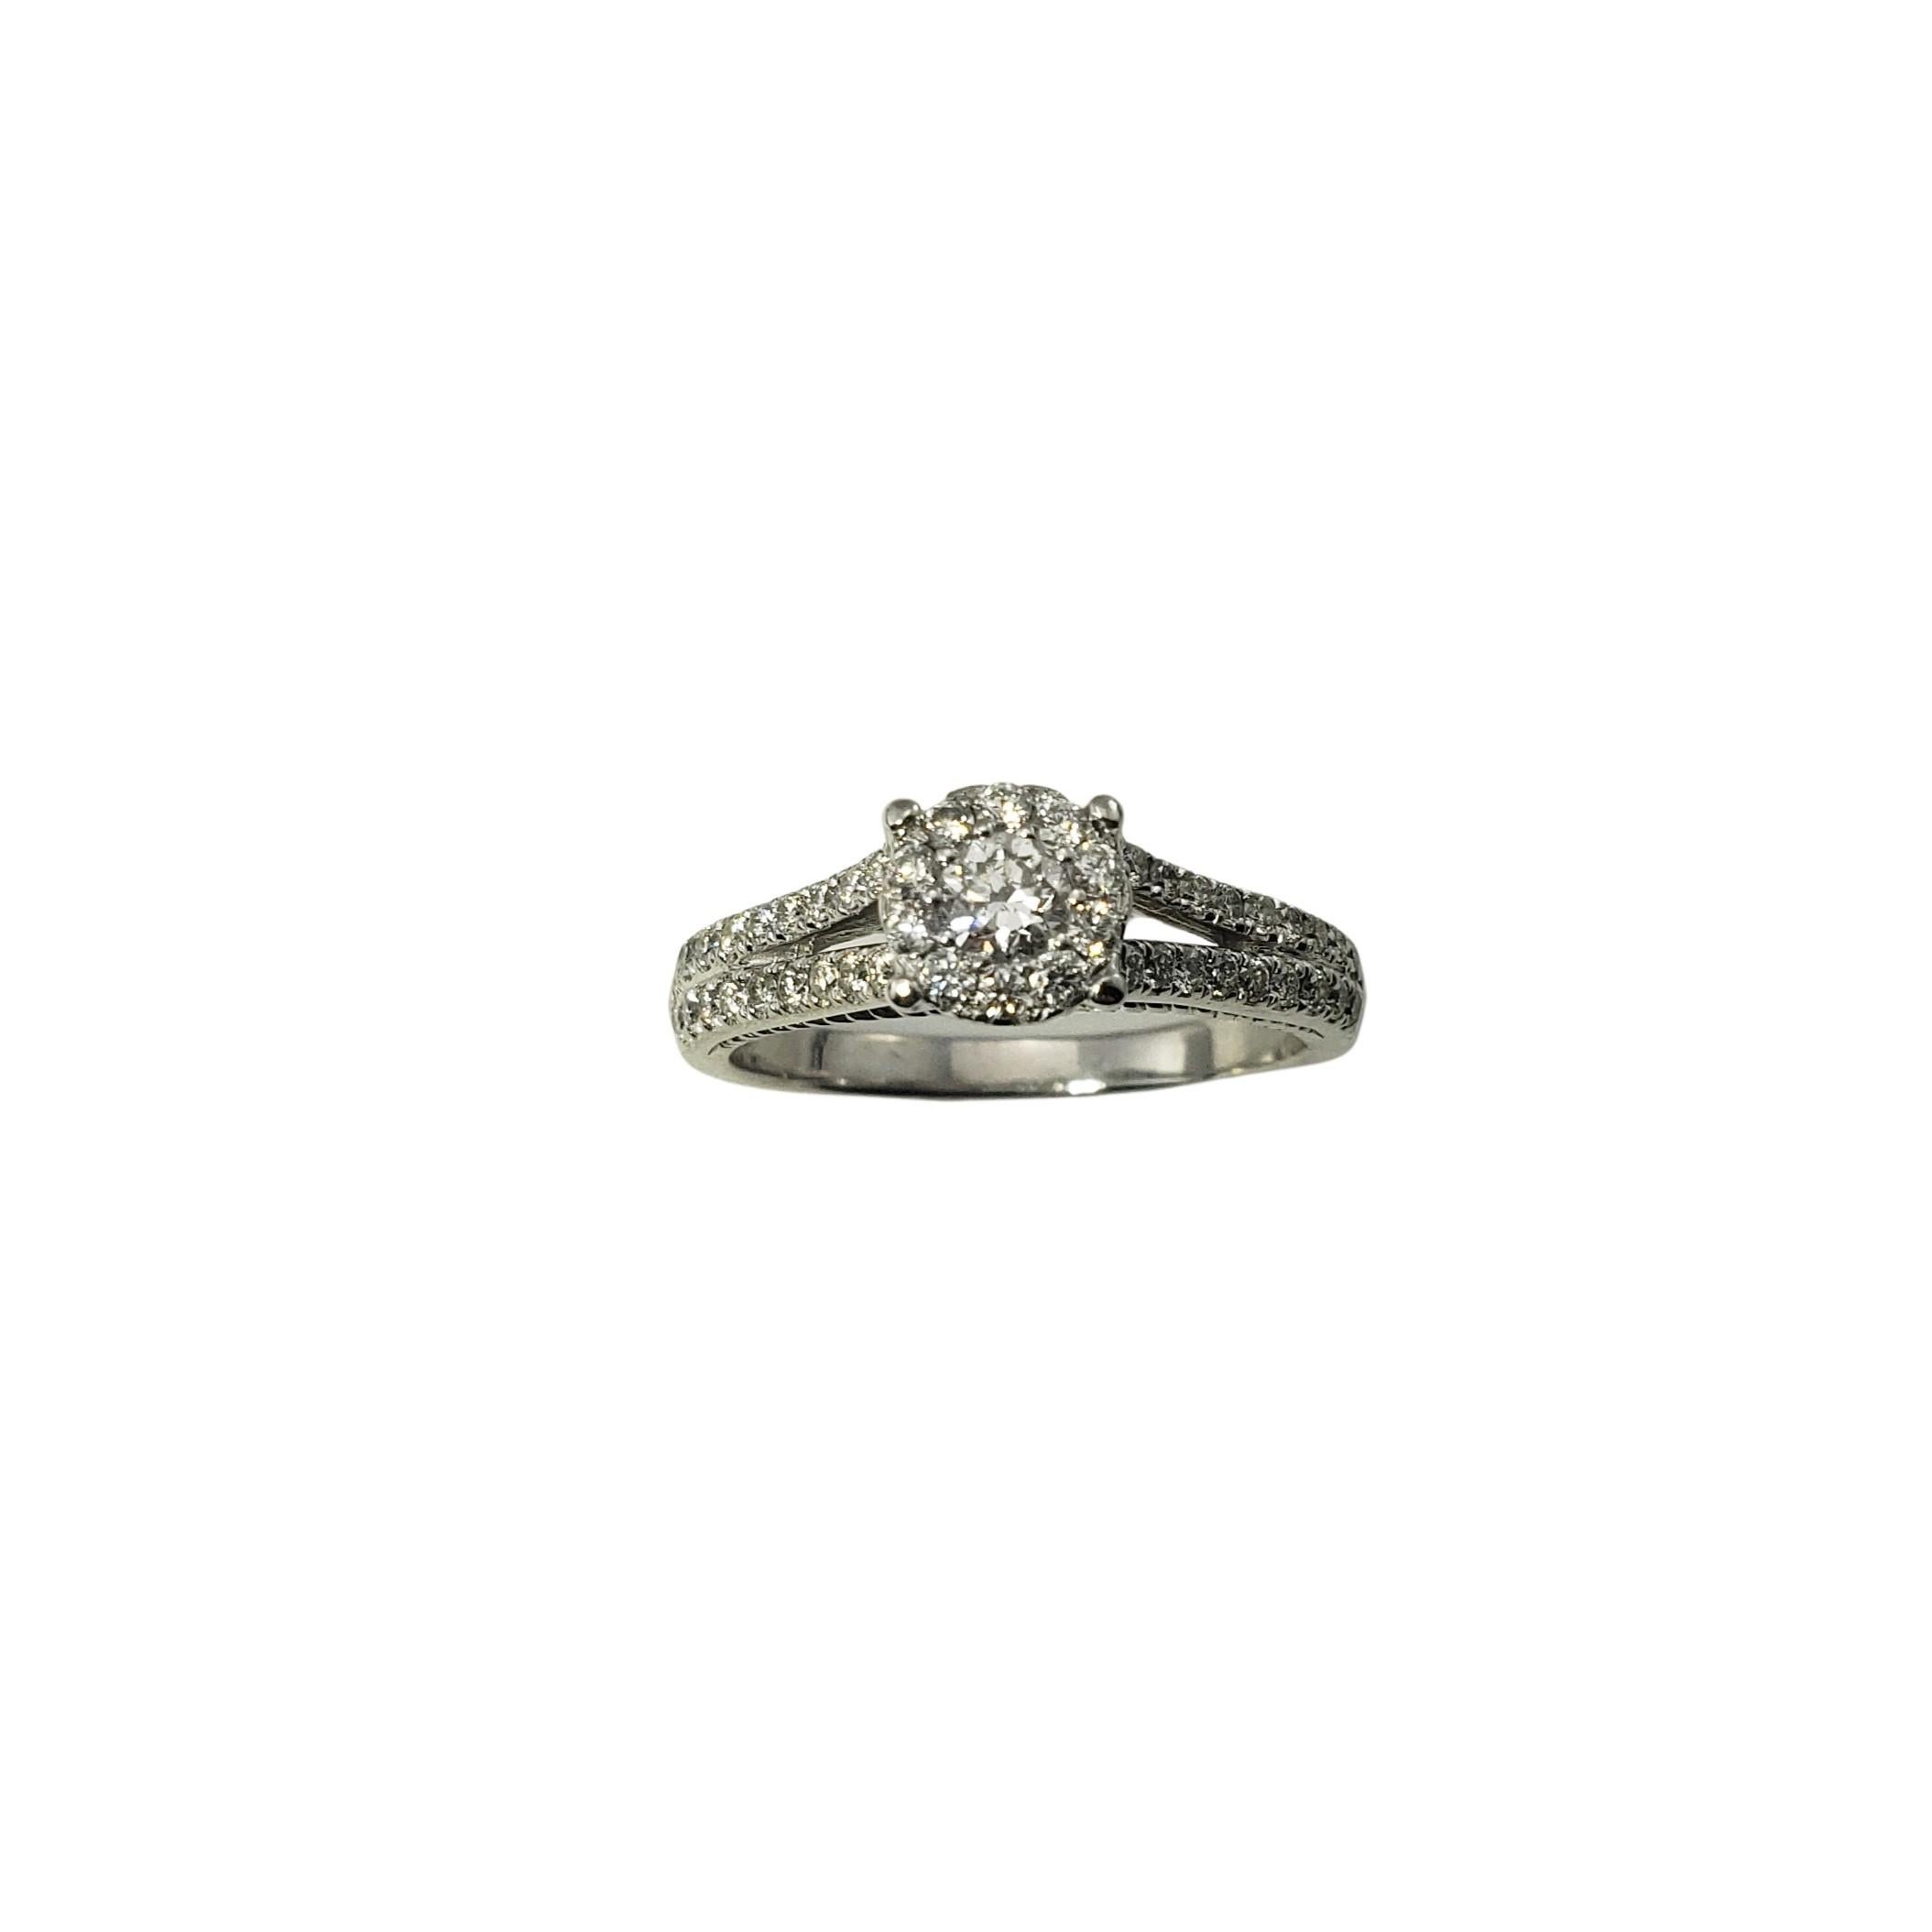 14 Karat White Gold and Diamond Ring Size 9.25-

This sparkling ring features 47 round brilliant cut diamonds (center: .20 ct.) set in beautifully detailed 14K white gold.  
Width:  8 mm.
Shank:  2 mm.

Approximate total diamond weight:  .76